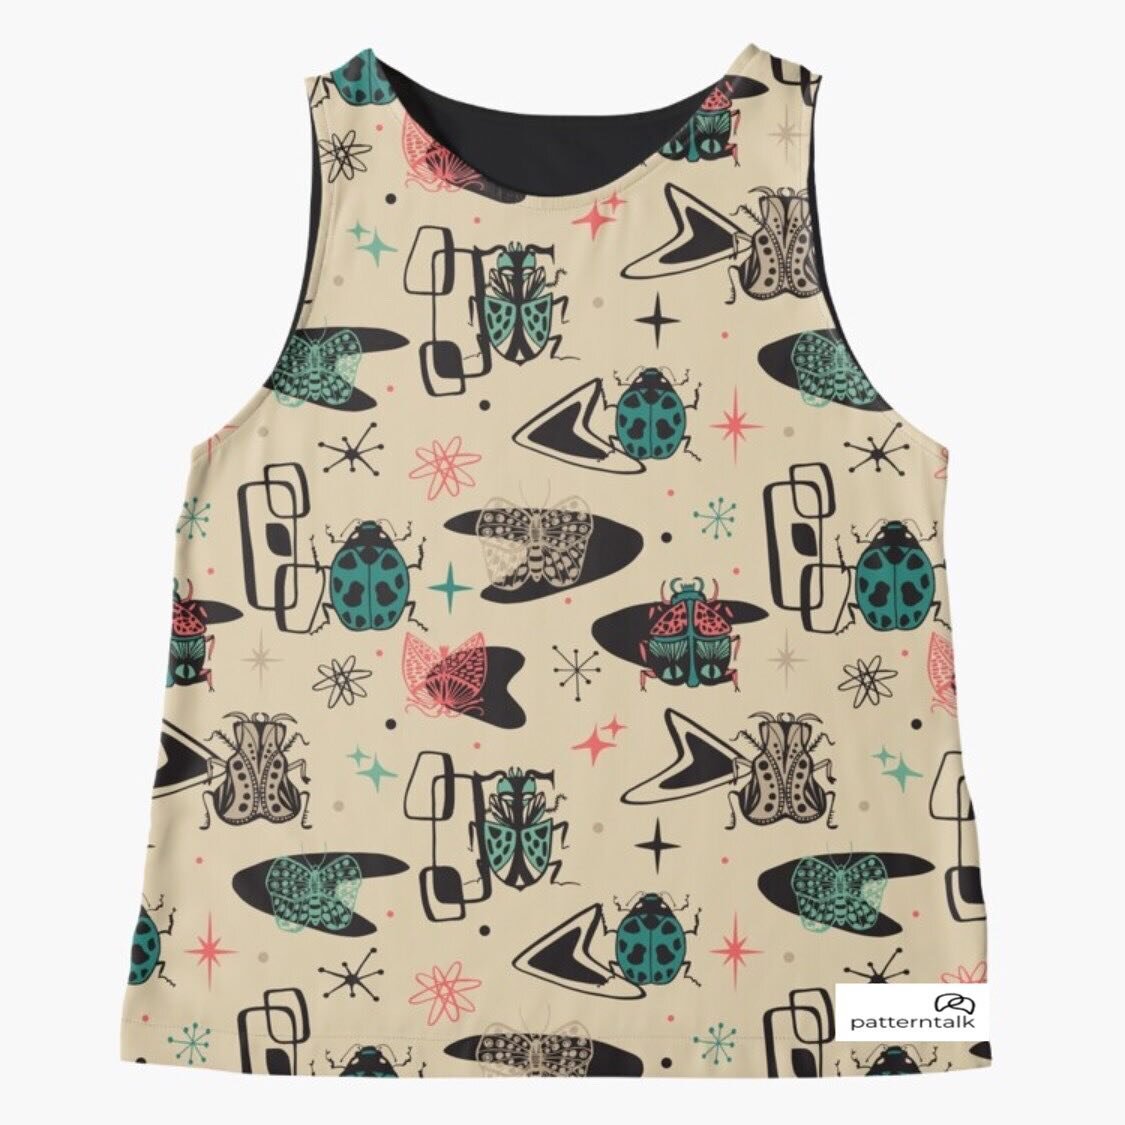 So fun! My Retro Bugs design on tops and tees! Maybe my affinity towards bugs comes from my Dad&rsquo;s nickname for me as a kid: Nat Bug 🐞 😂 
You can find this design in my Redbubble shop on a ton of cool products! 💫
#retrobugs #tanktop #tees #co